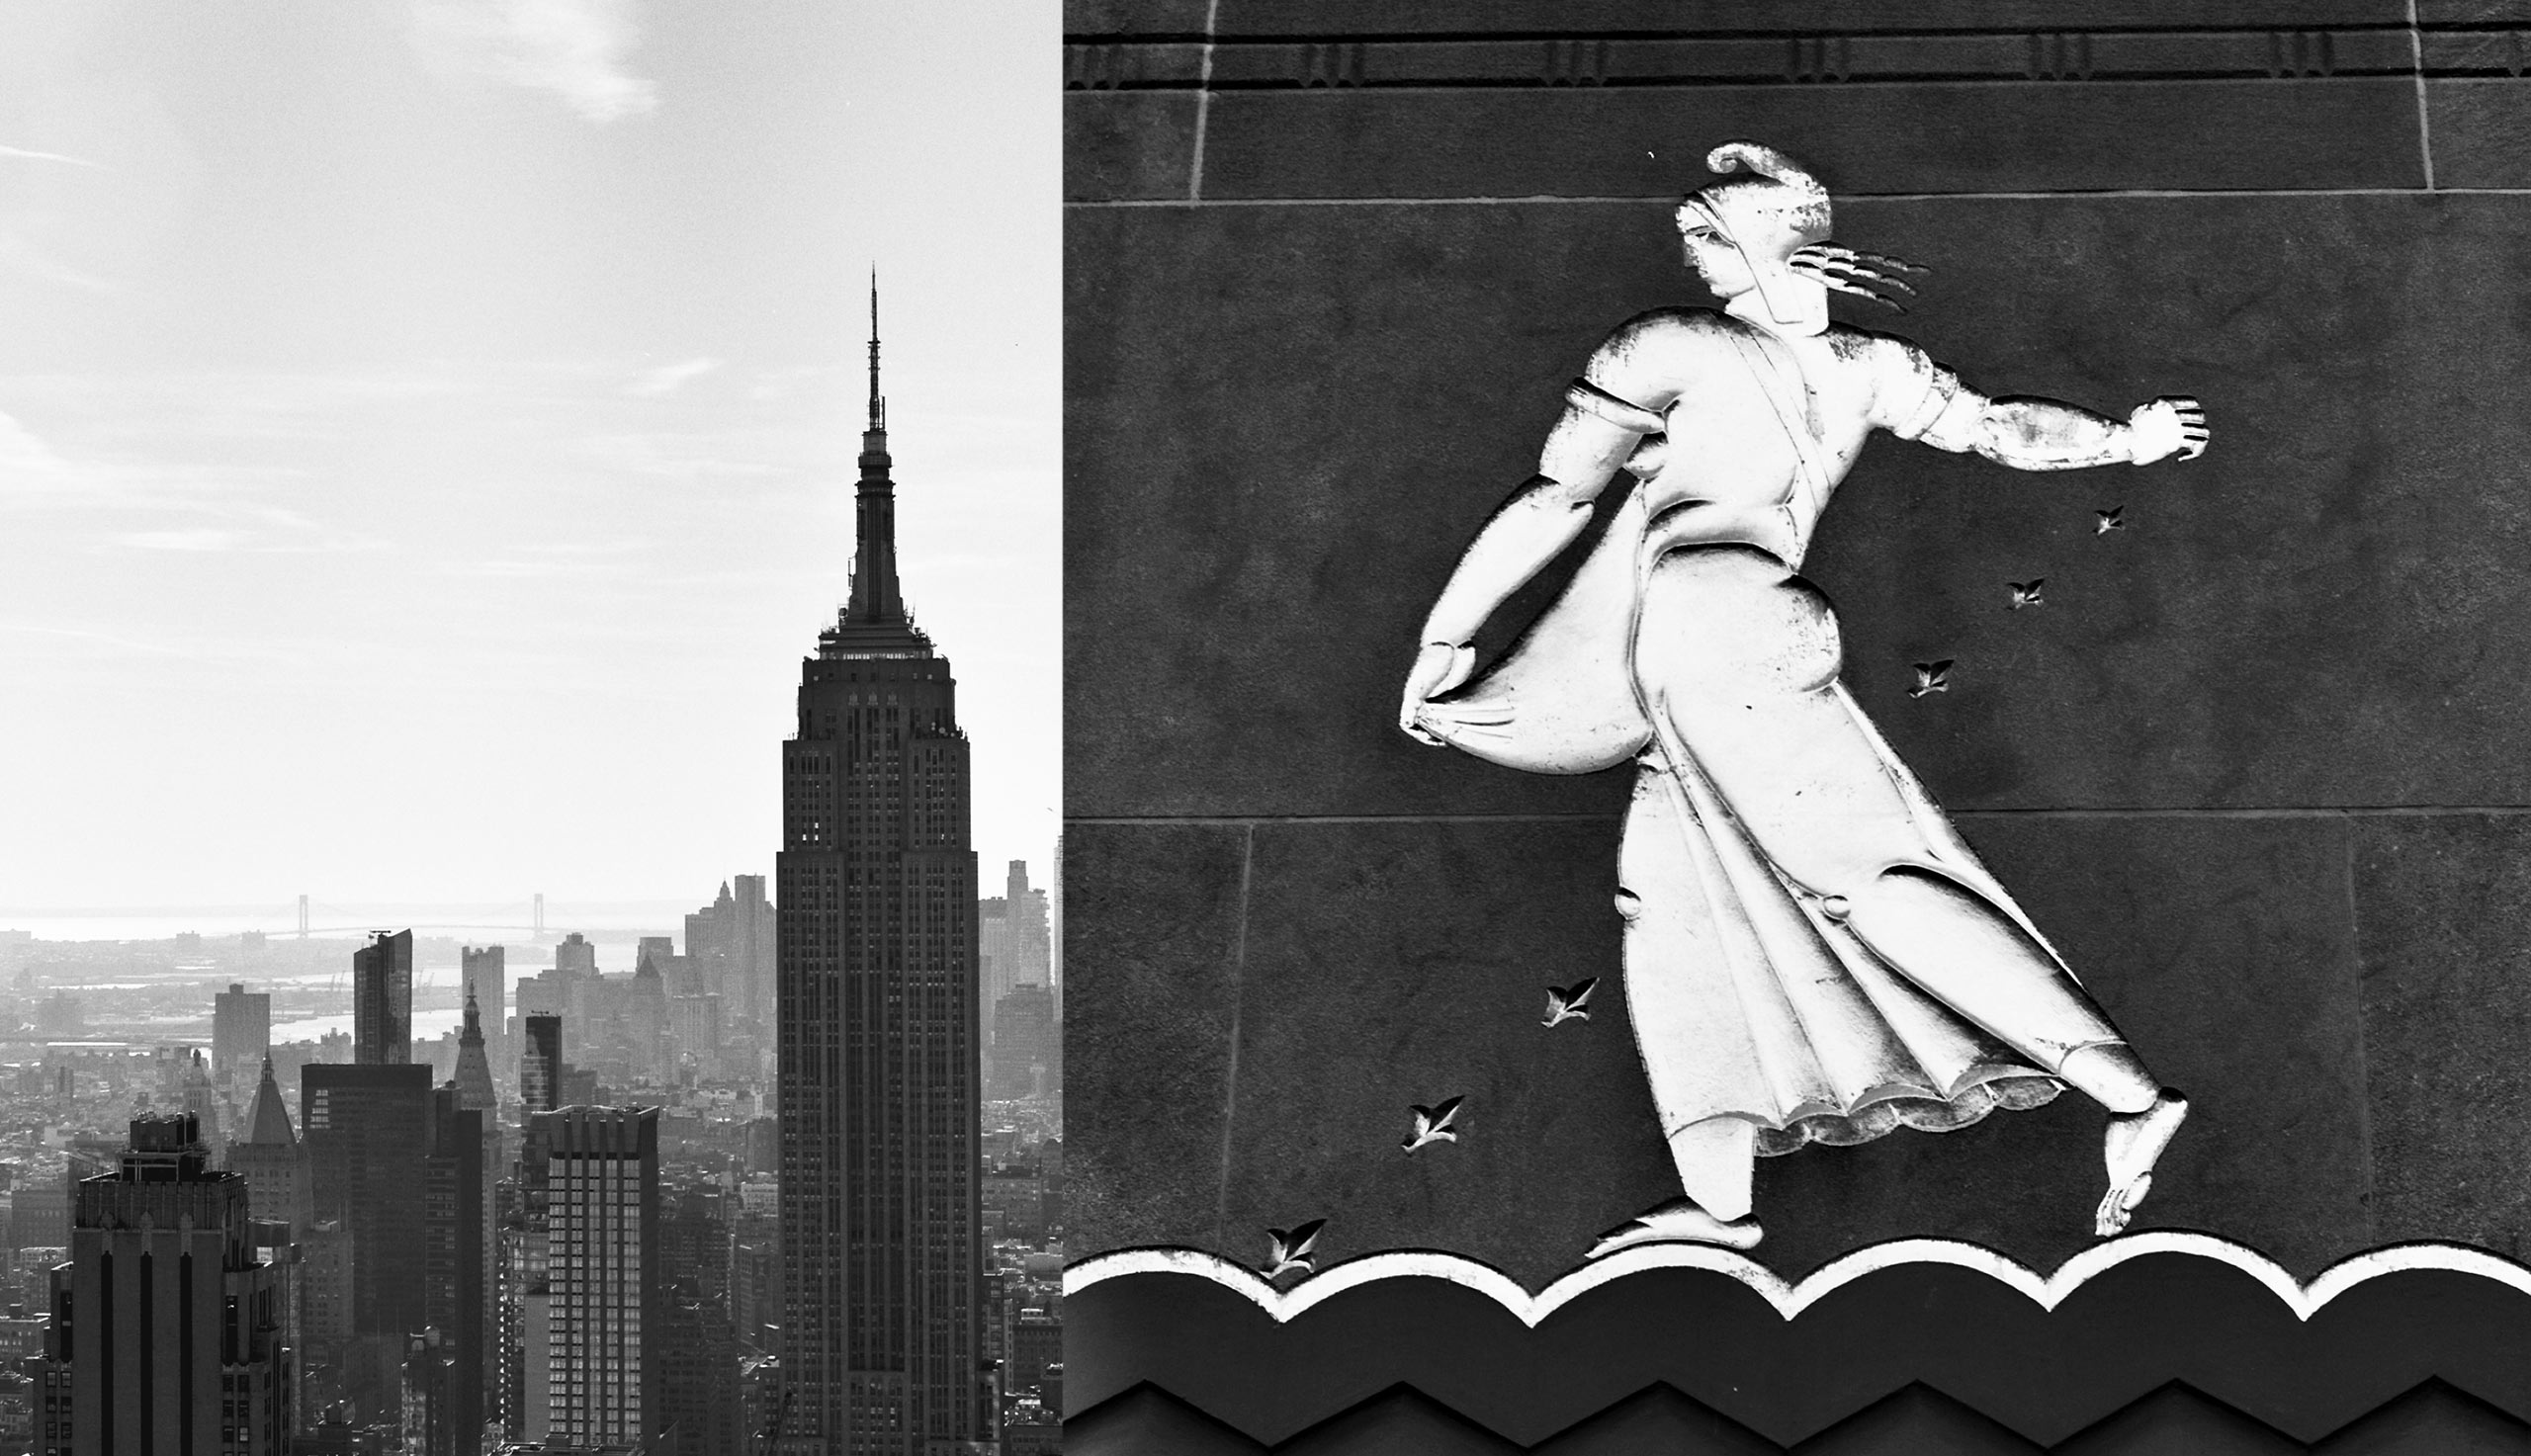 Left: The Empire State Building. Right: an Art Deco relief at Rockefeller Center